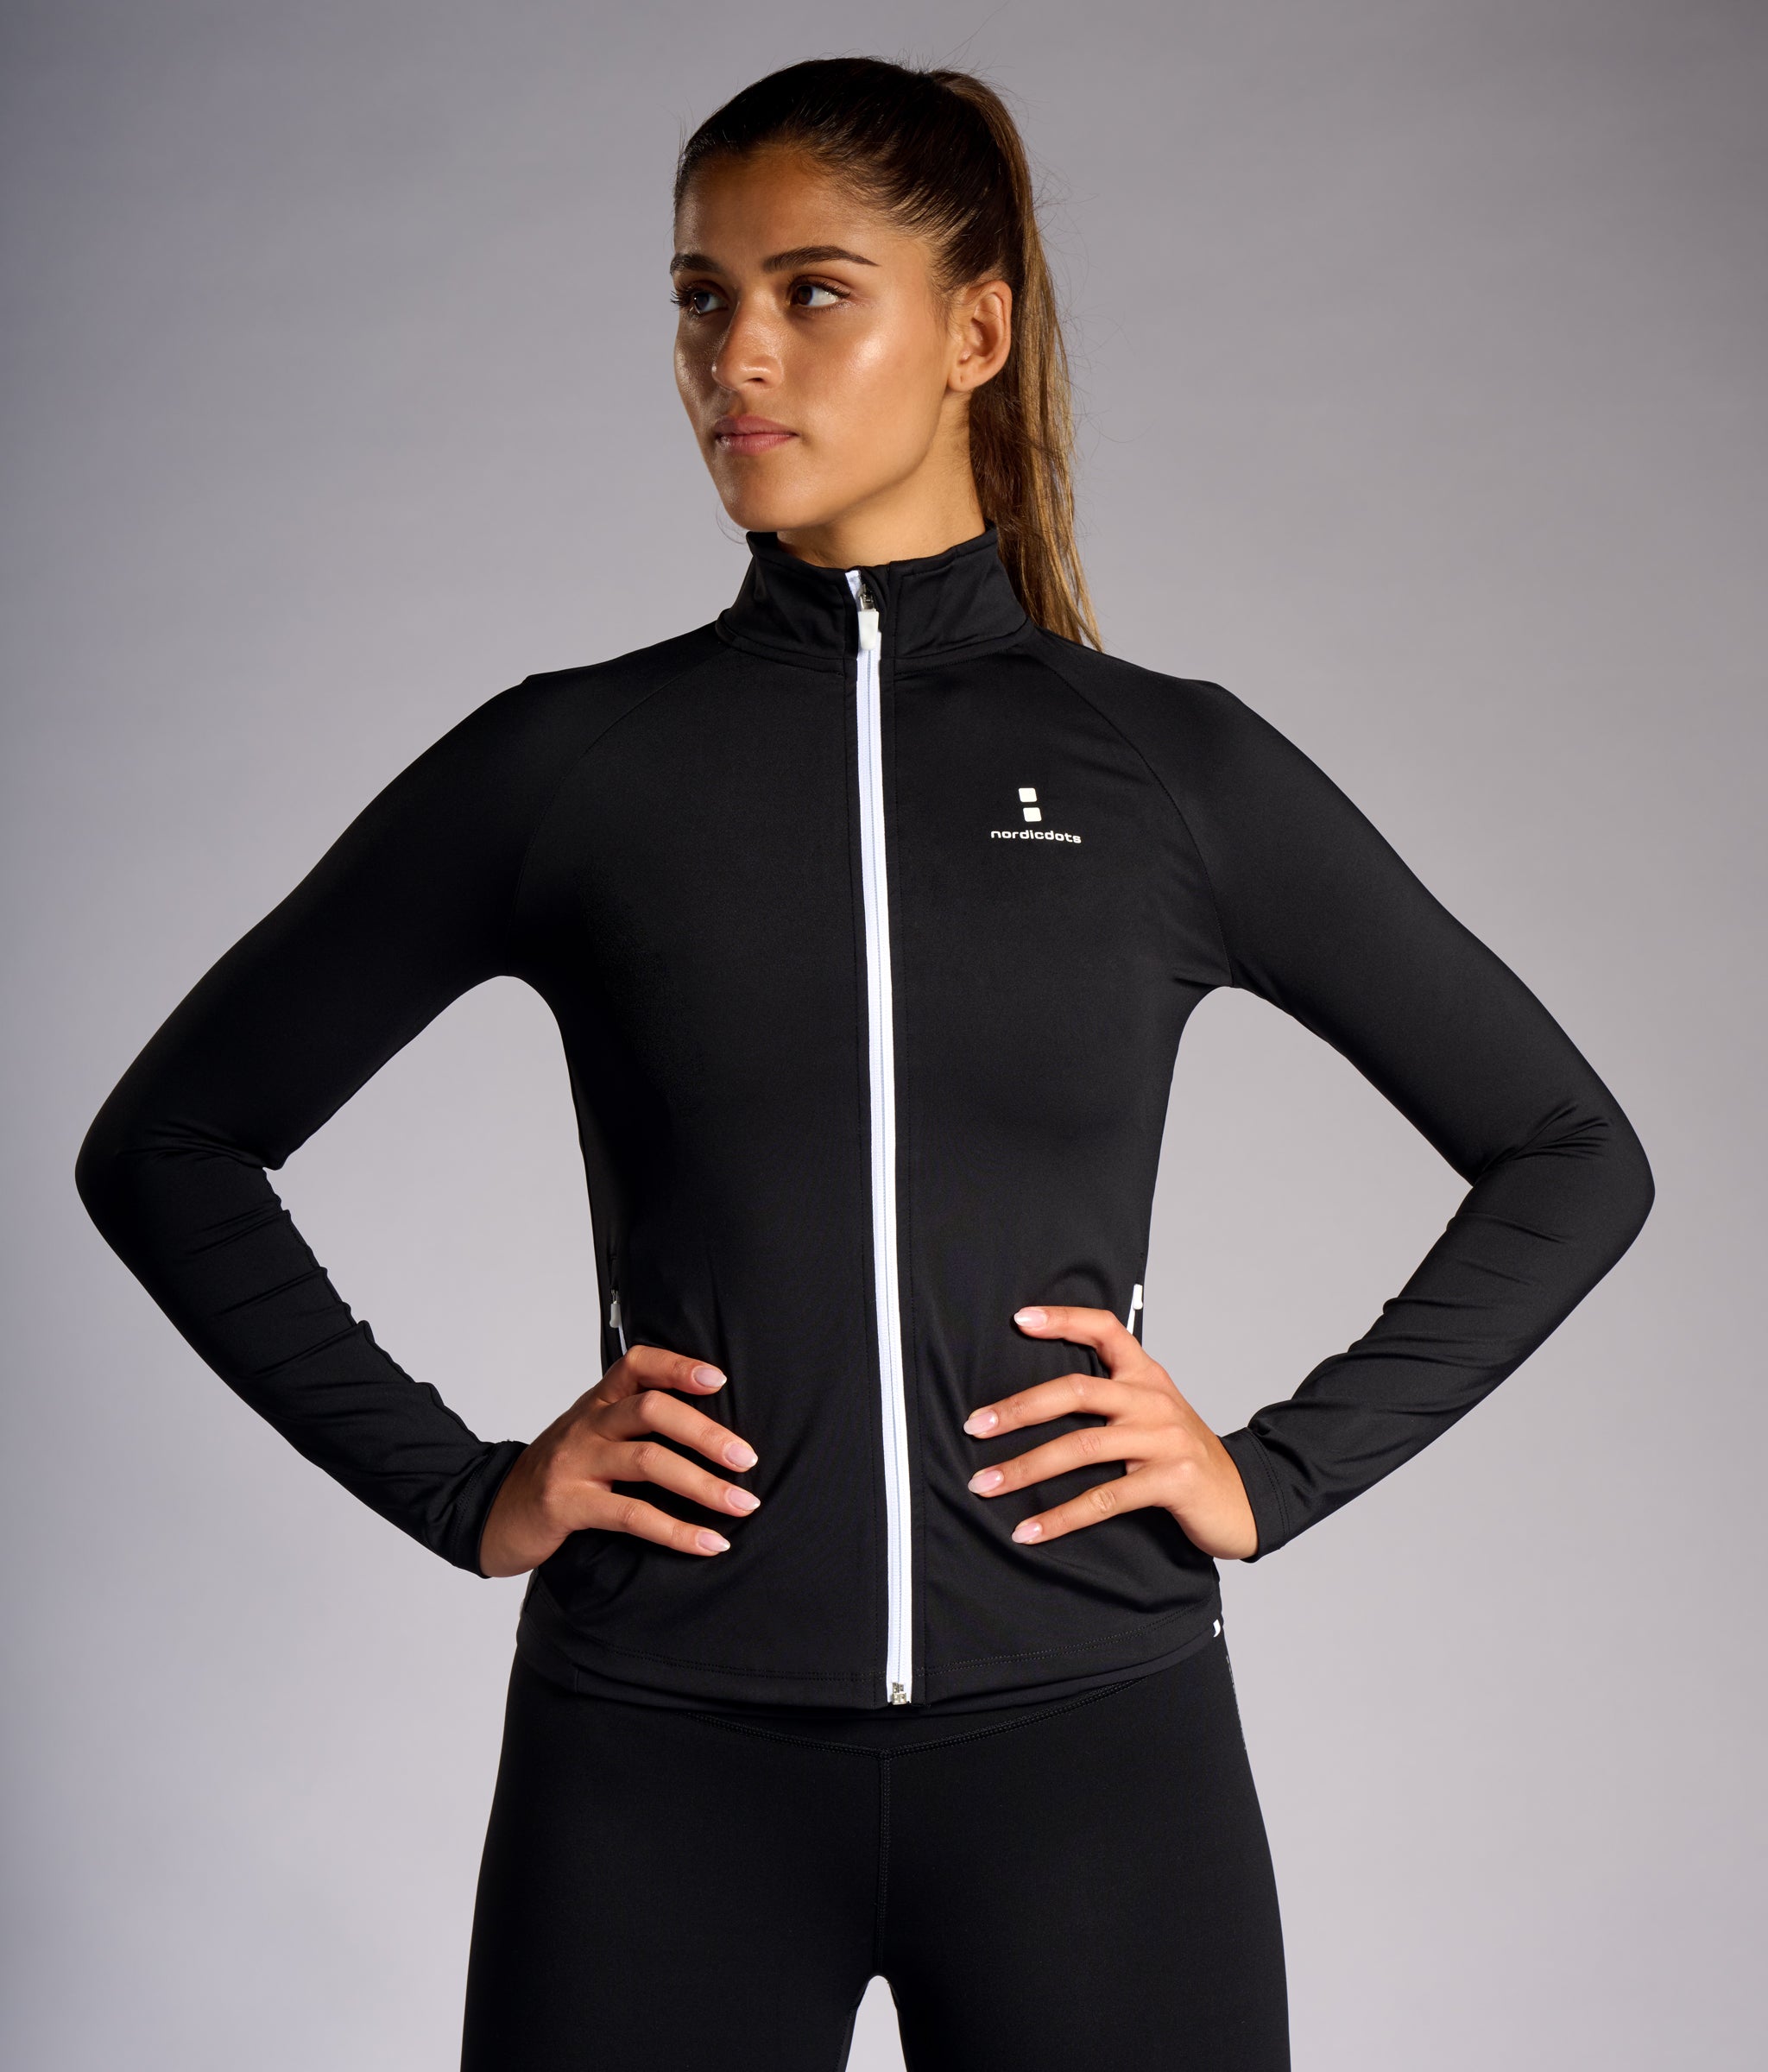 nordicdots long sleeve jacket in black colour for women tennis padel fitness compression nordicdots.com